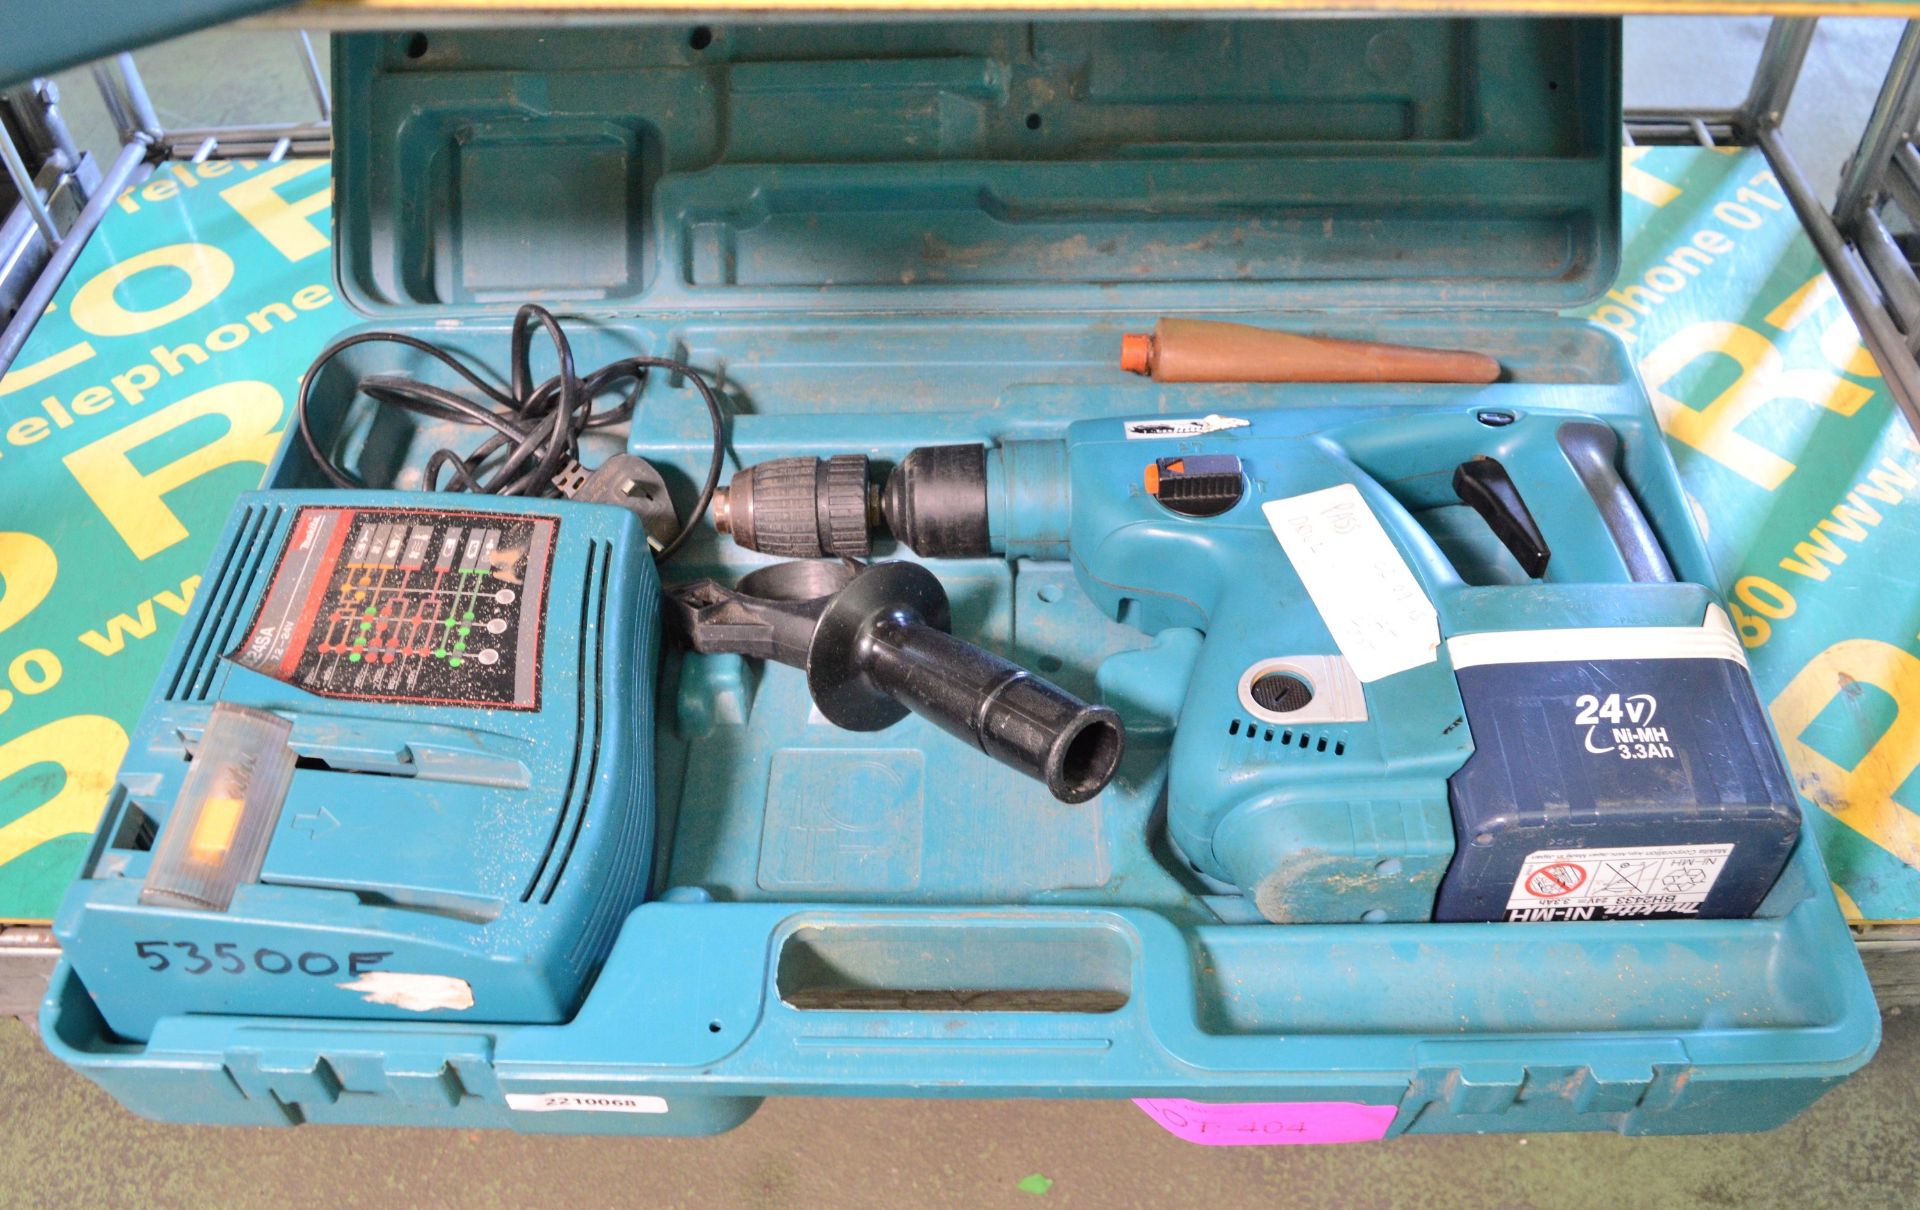 Makita 24V Cordless Hammer Drill & Charger in Carry Case.